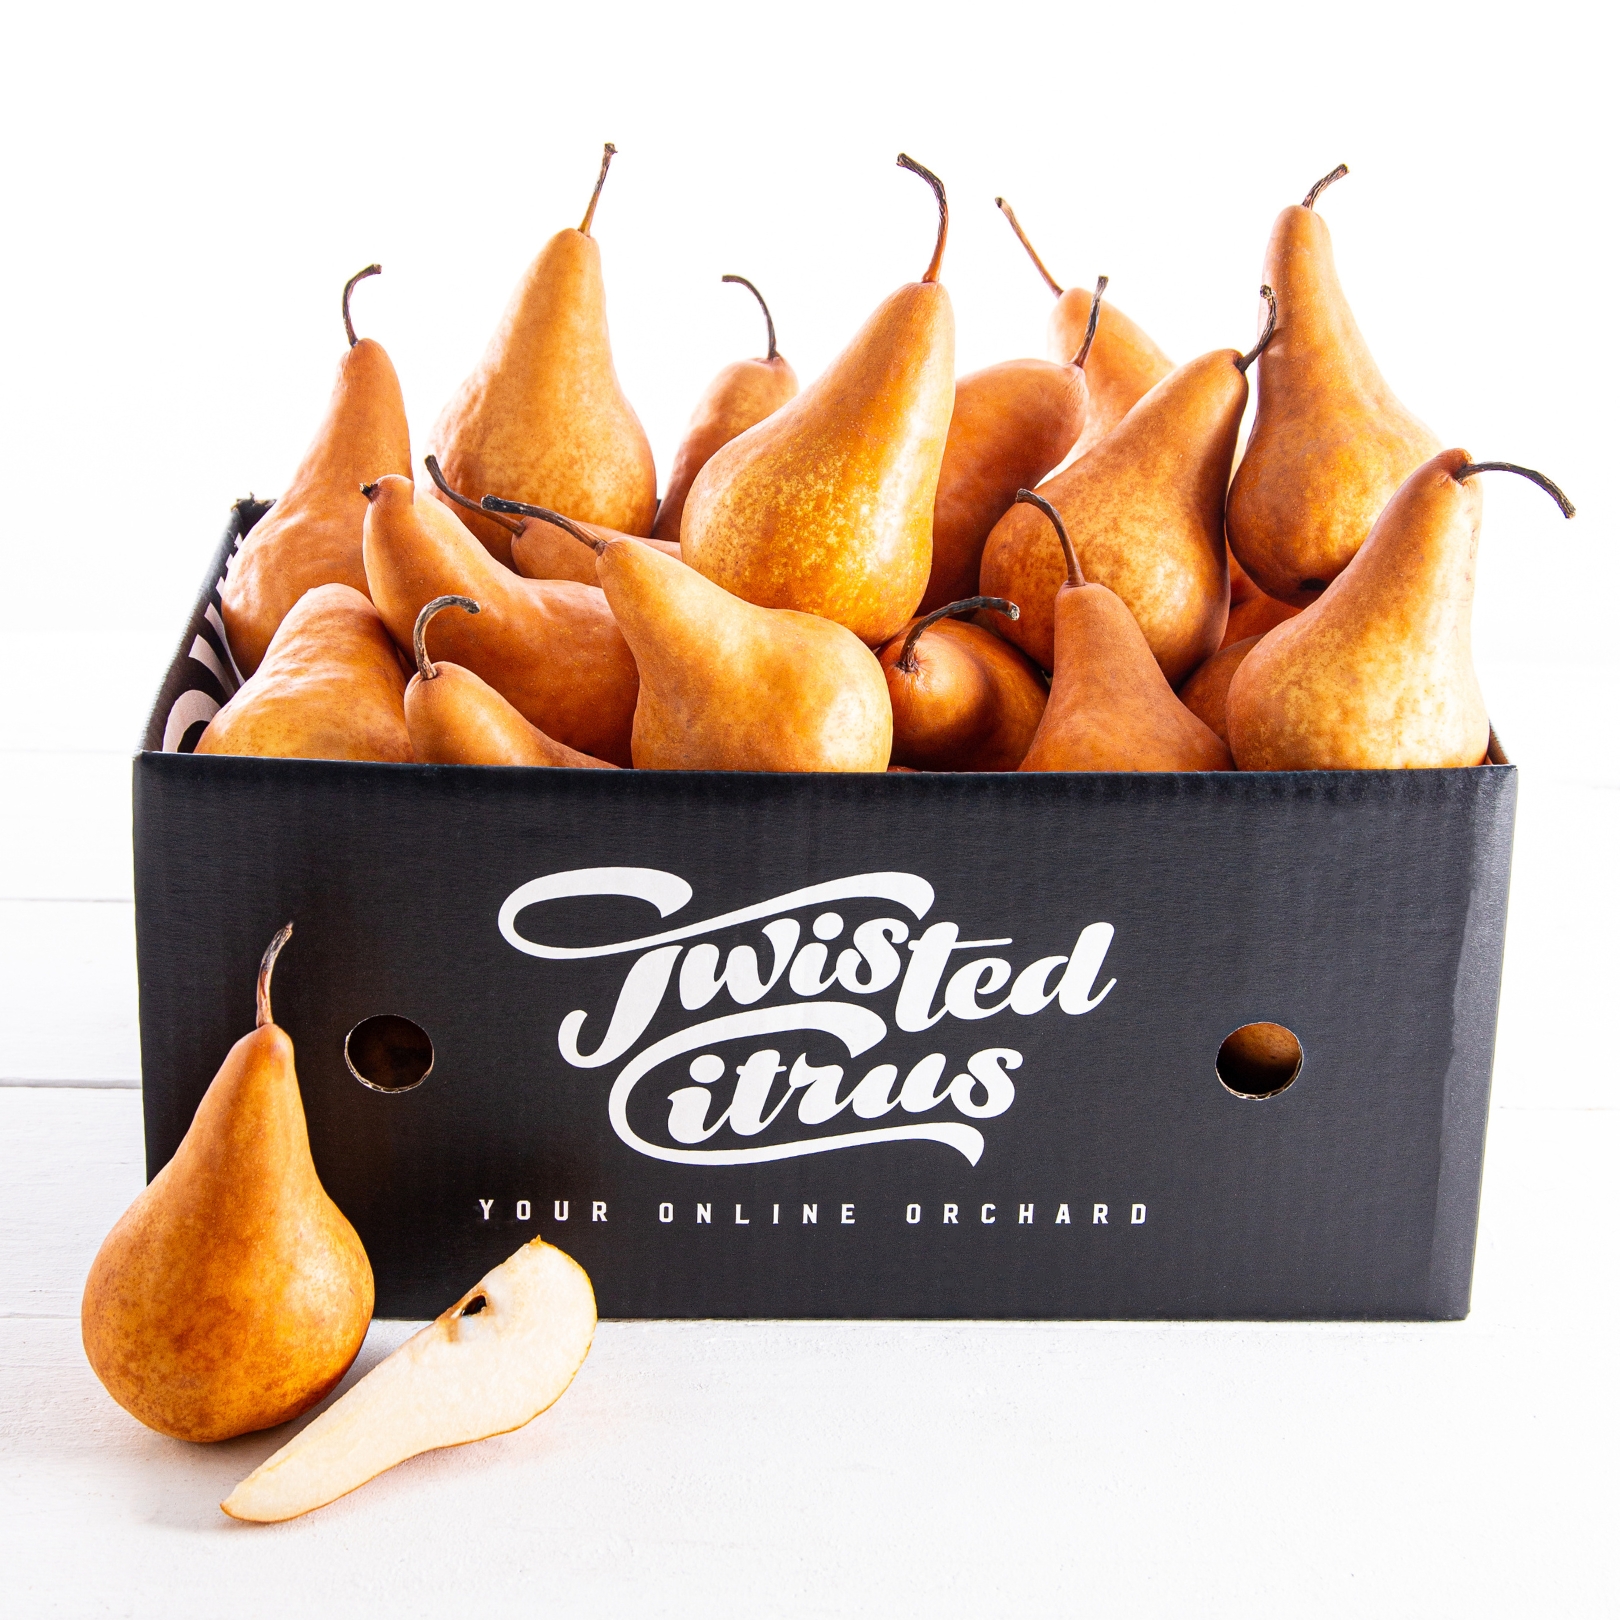 Pears - Bosc fruit box delivery nz